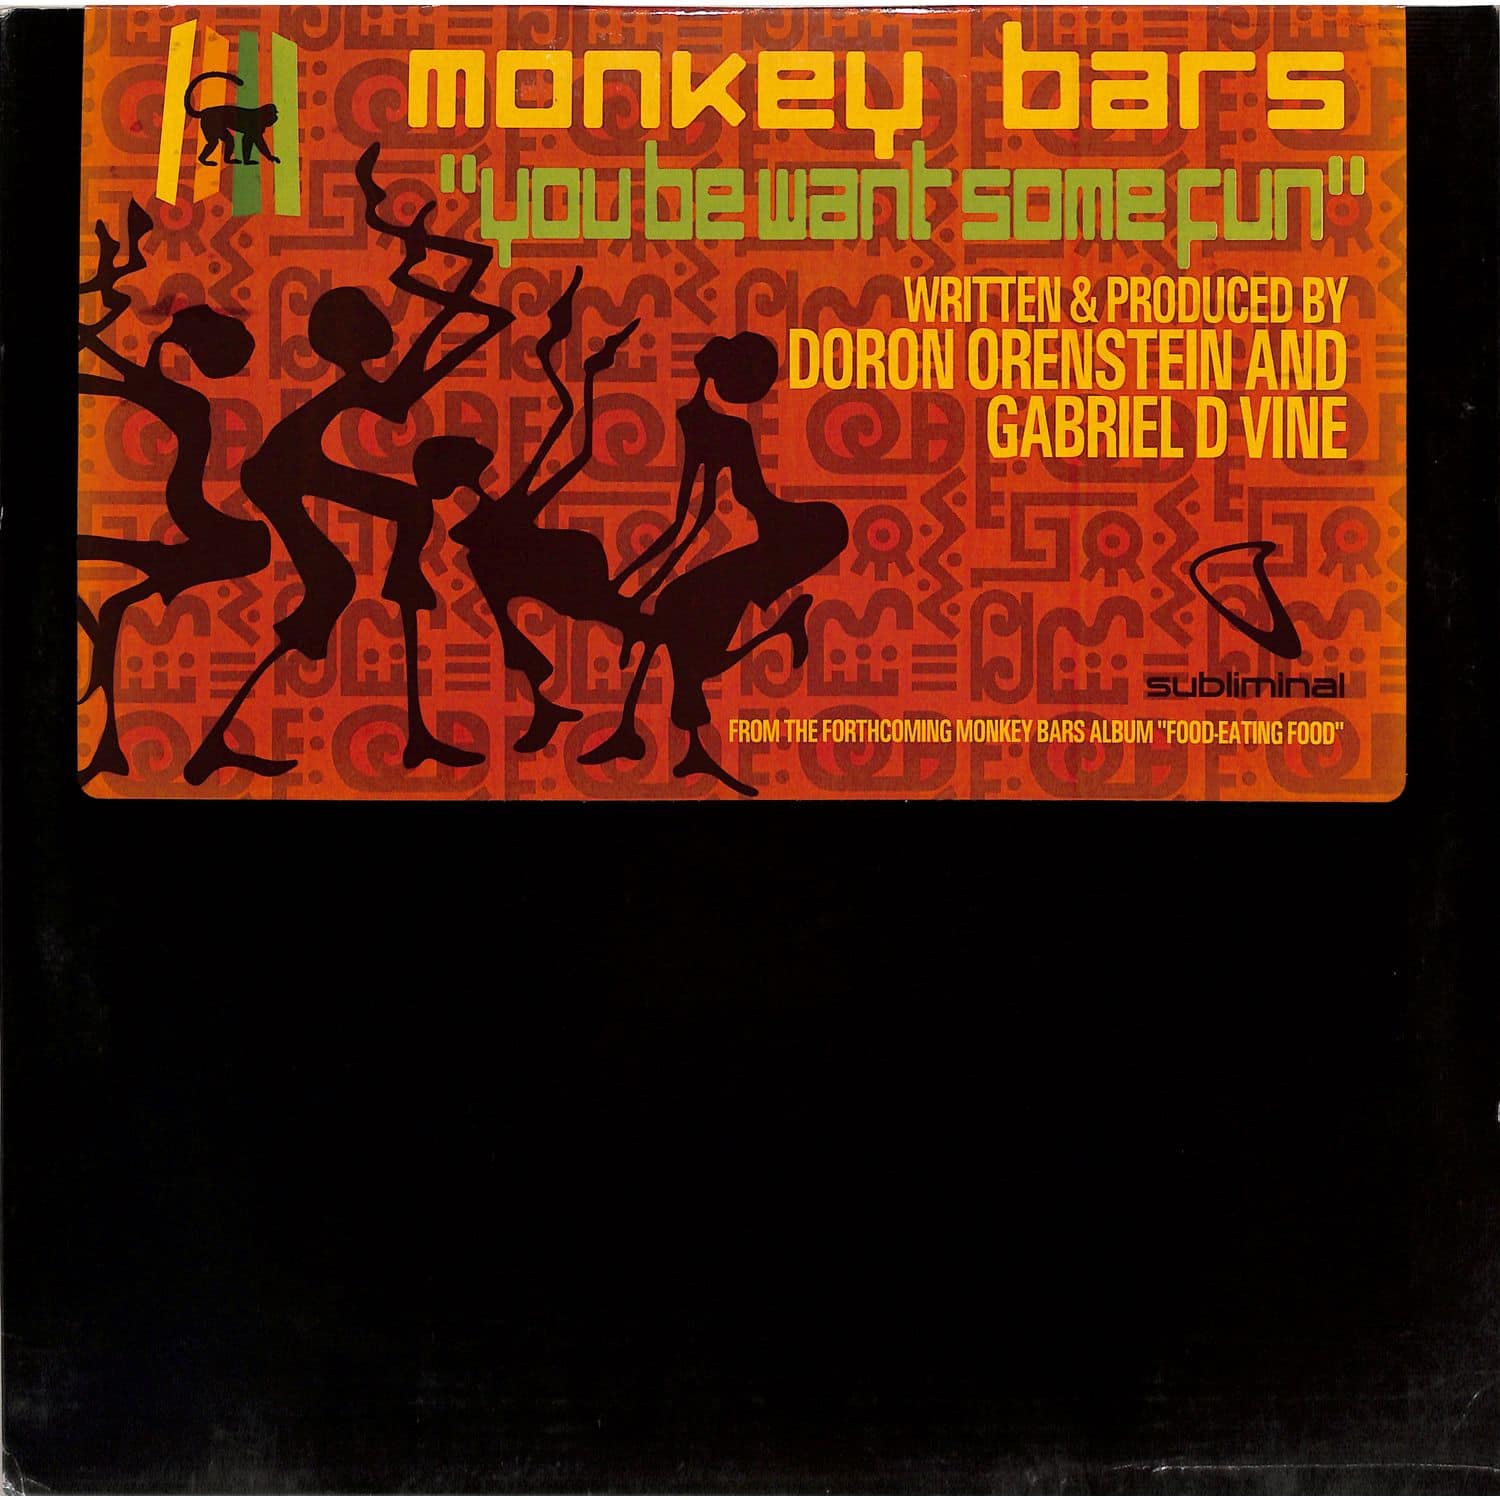 Monkey Bars - YOU BE WANT SOME FUN